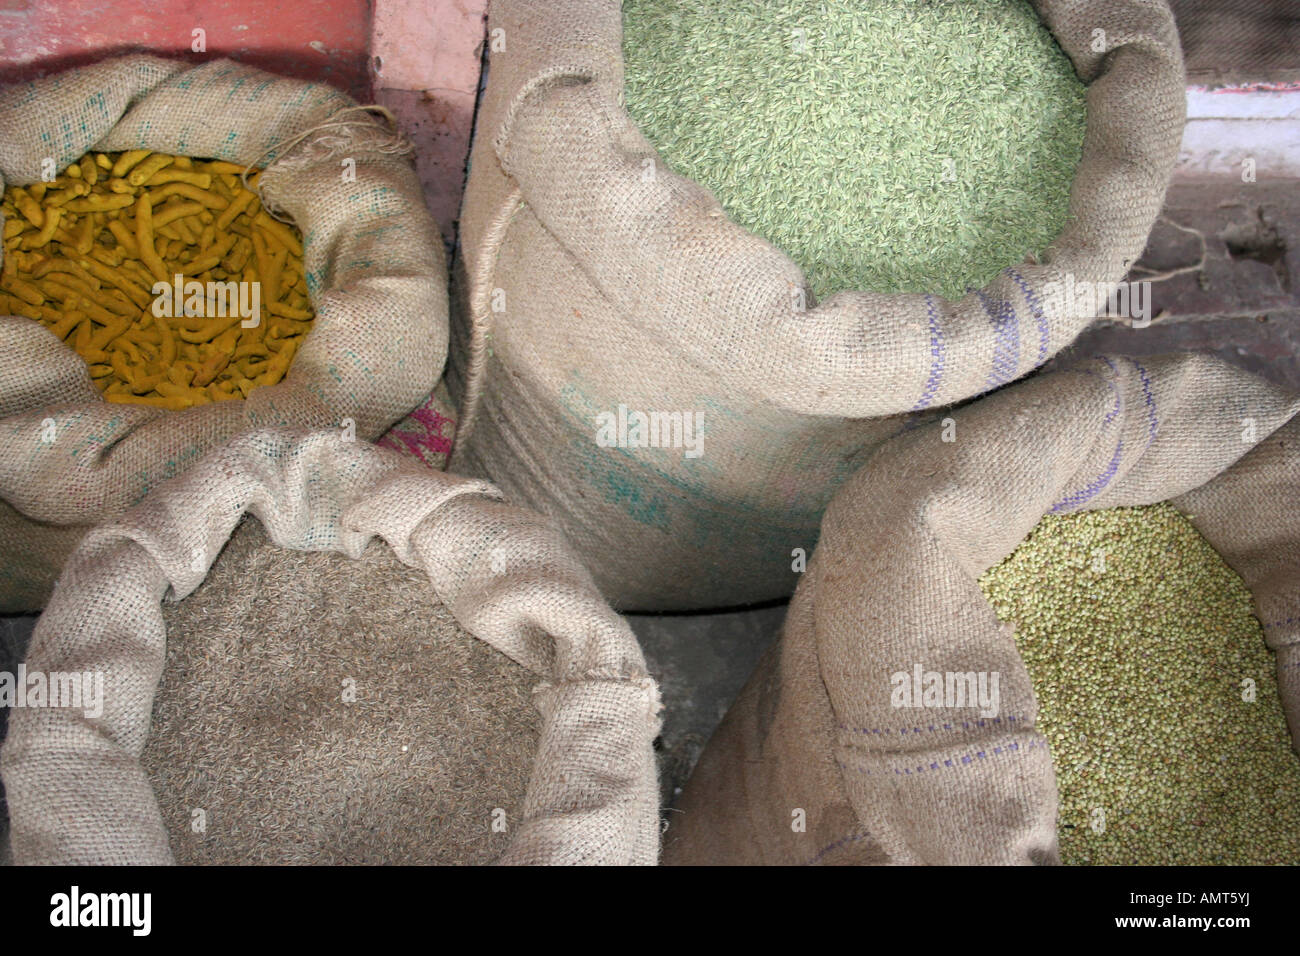 Sacks of turmeric, rice and different grains on display outside a shop in Jaipur, India Stock Photo